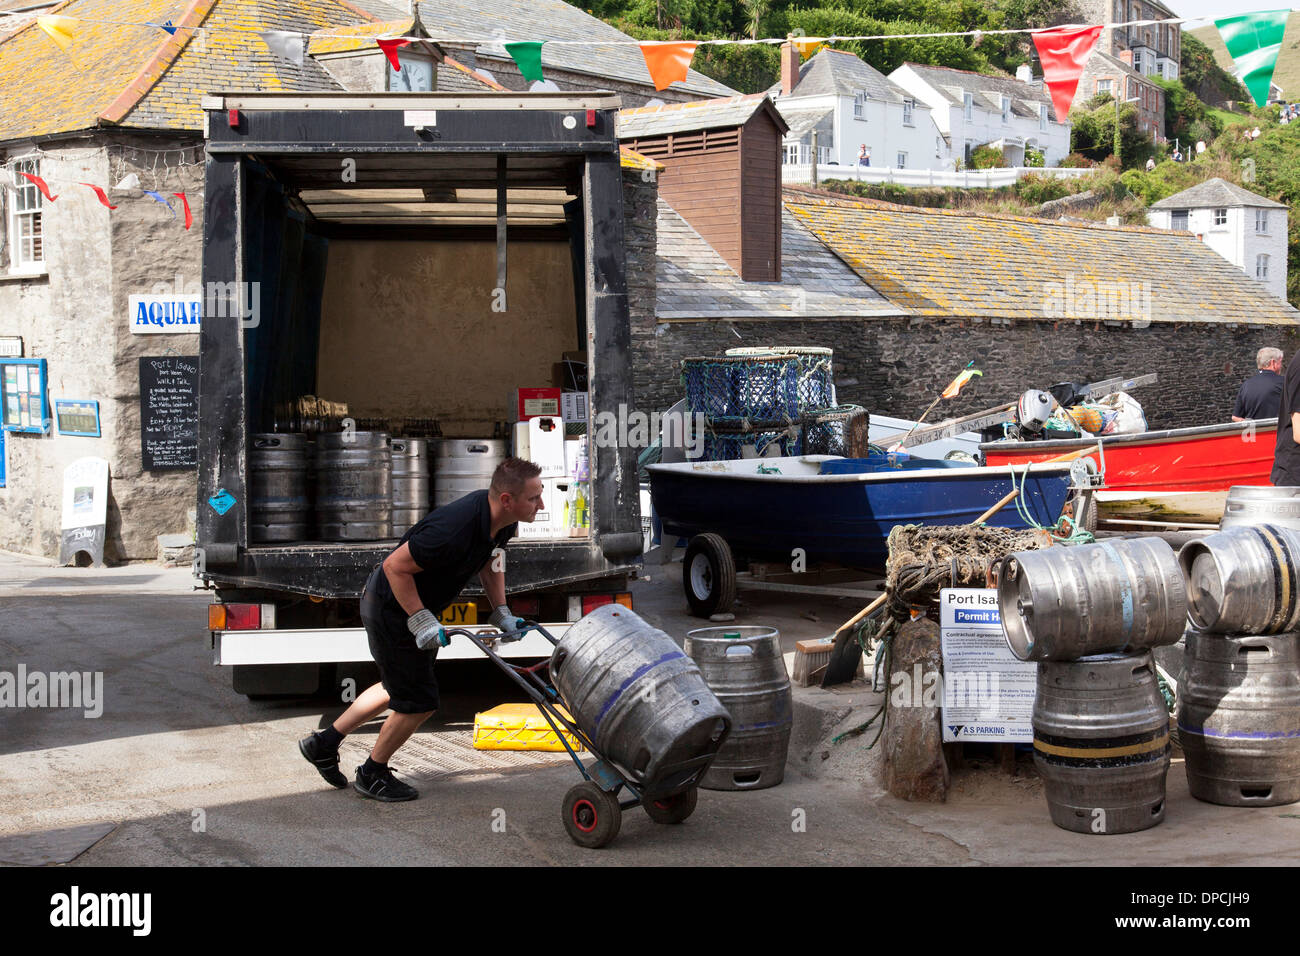 A brewery drayman delivering beer kegs to a public house in Cornwall, U.K. Stock Photo